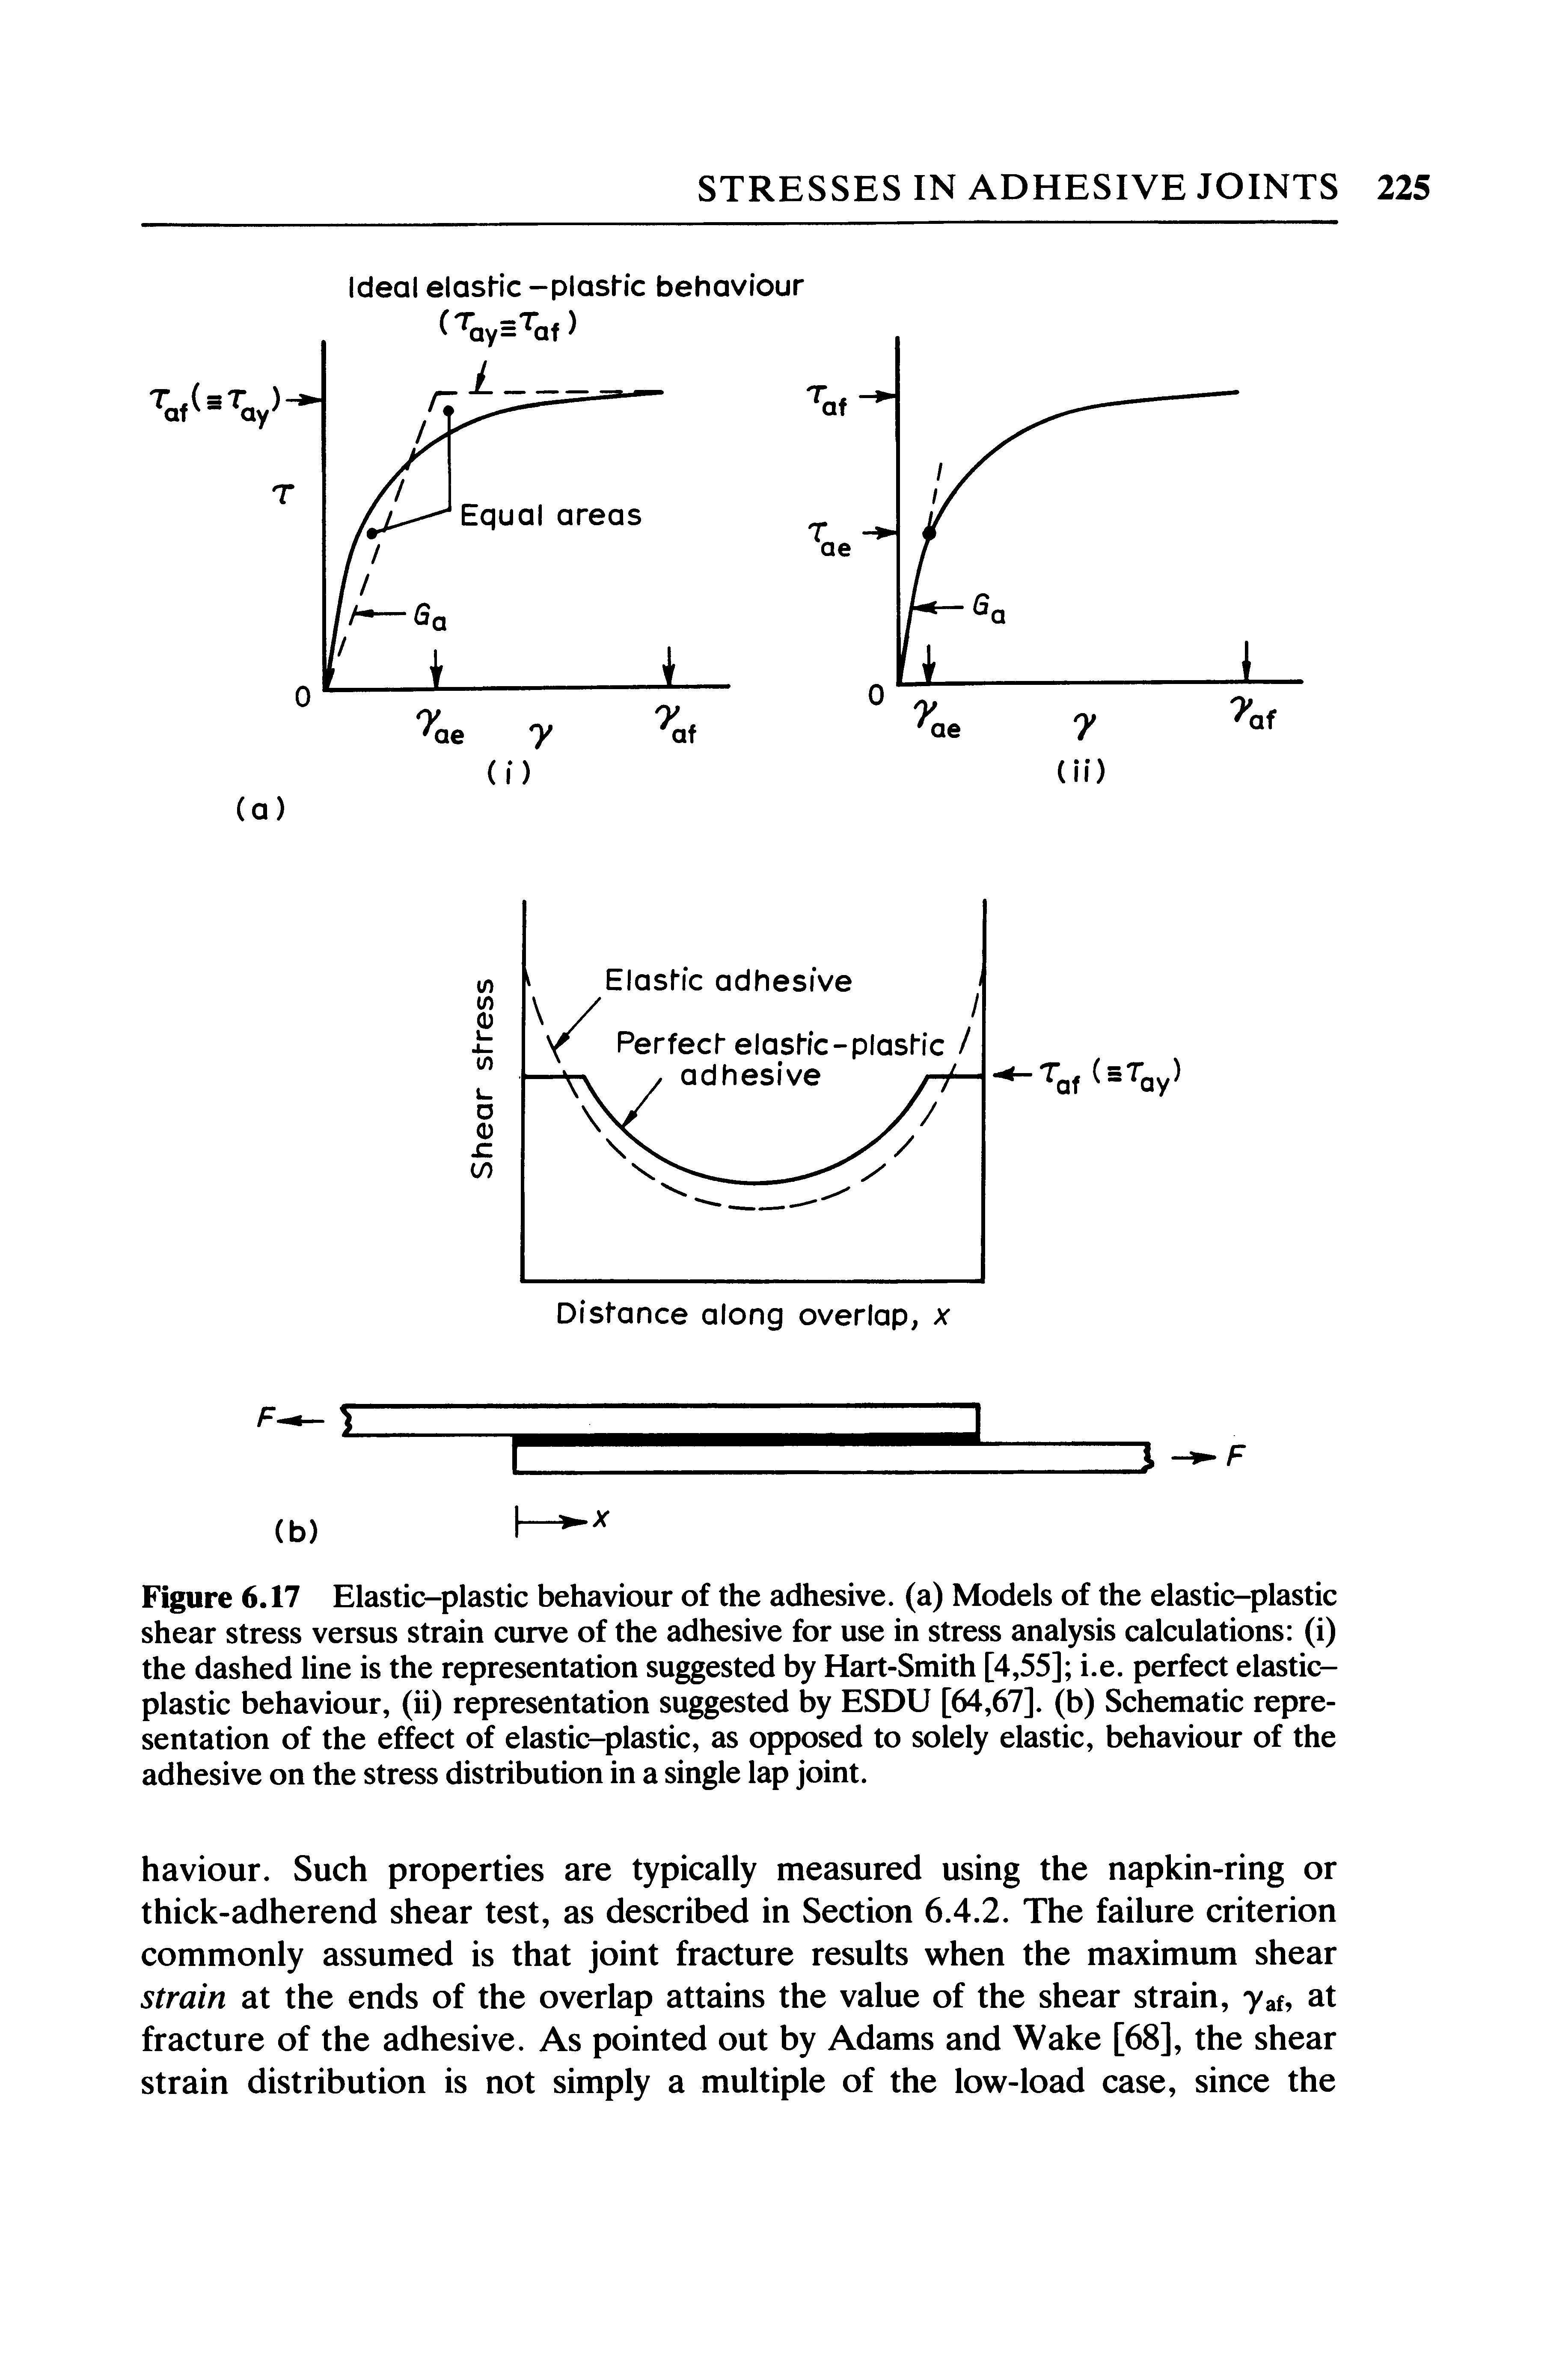 Figure 6.17 Elastic-plastic behaviour of the adhesive, (a) Models of the elastic-plastic shear stress versus strain curve of the adhesive for use in stress analysis calculations (i) the dashed line is the representation suggested by Hart-Smith [4,55] i.e. perfect elastic-plastic behaviour, (ii) representation suggested by ESDU [64,67]. (b) Schematic representation of the effect of elastic-plastic, as opposed to solely elastic, behaviour of the adhesive on the stress distribution in a single lap joint.